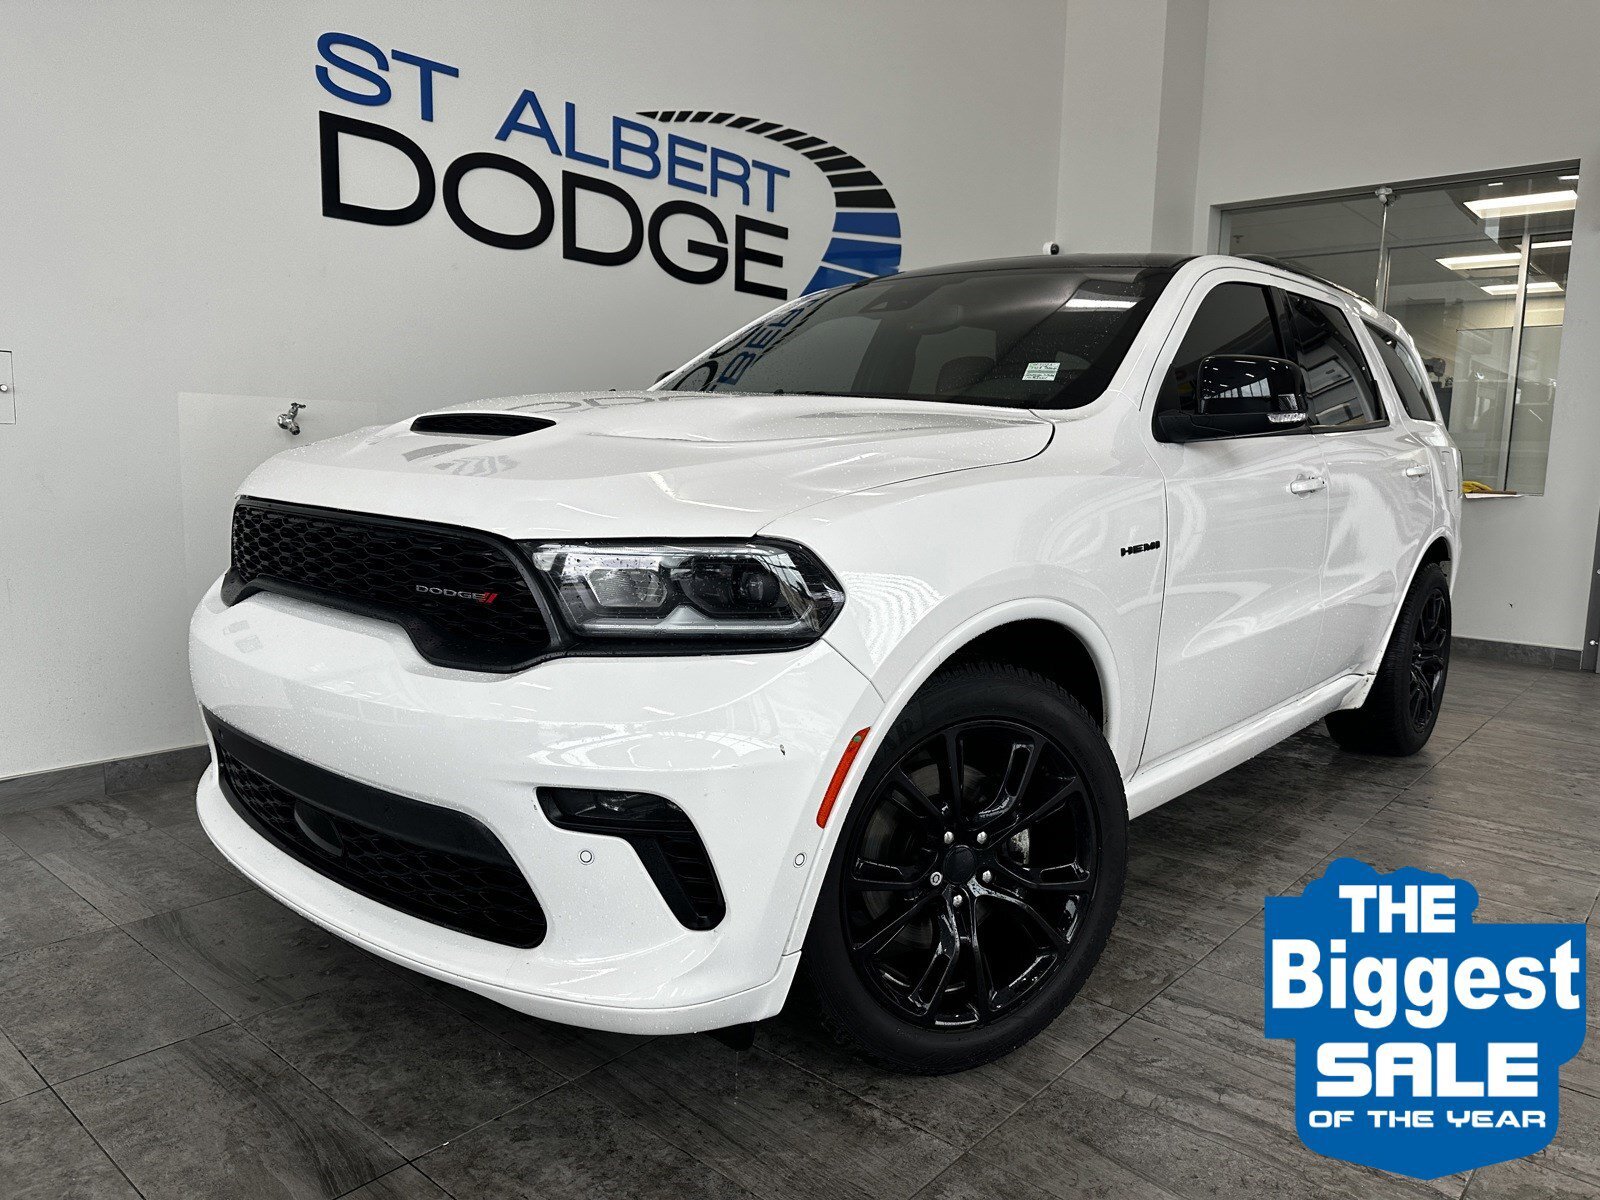 2021 Dodge Durango R/T| 10.1IN UCONNECT TOUCHSCREEN |